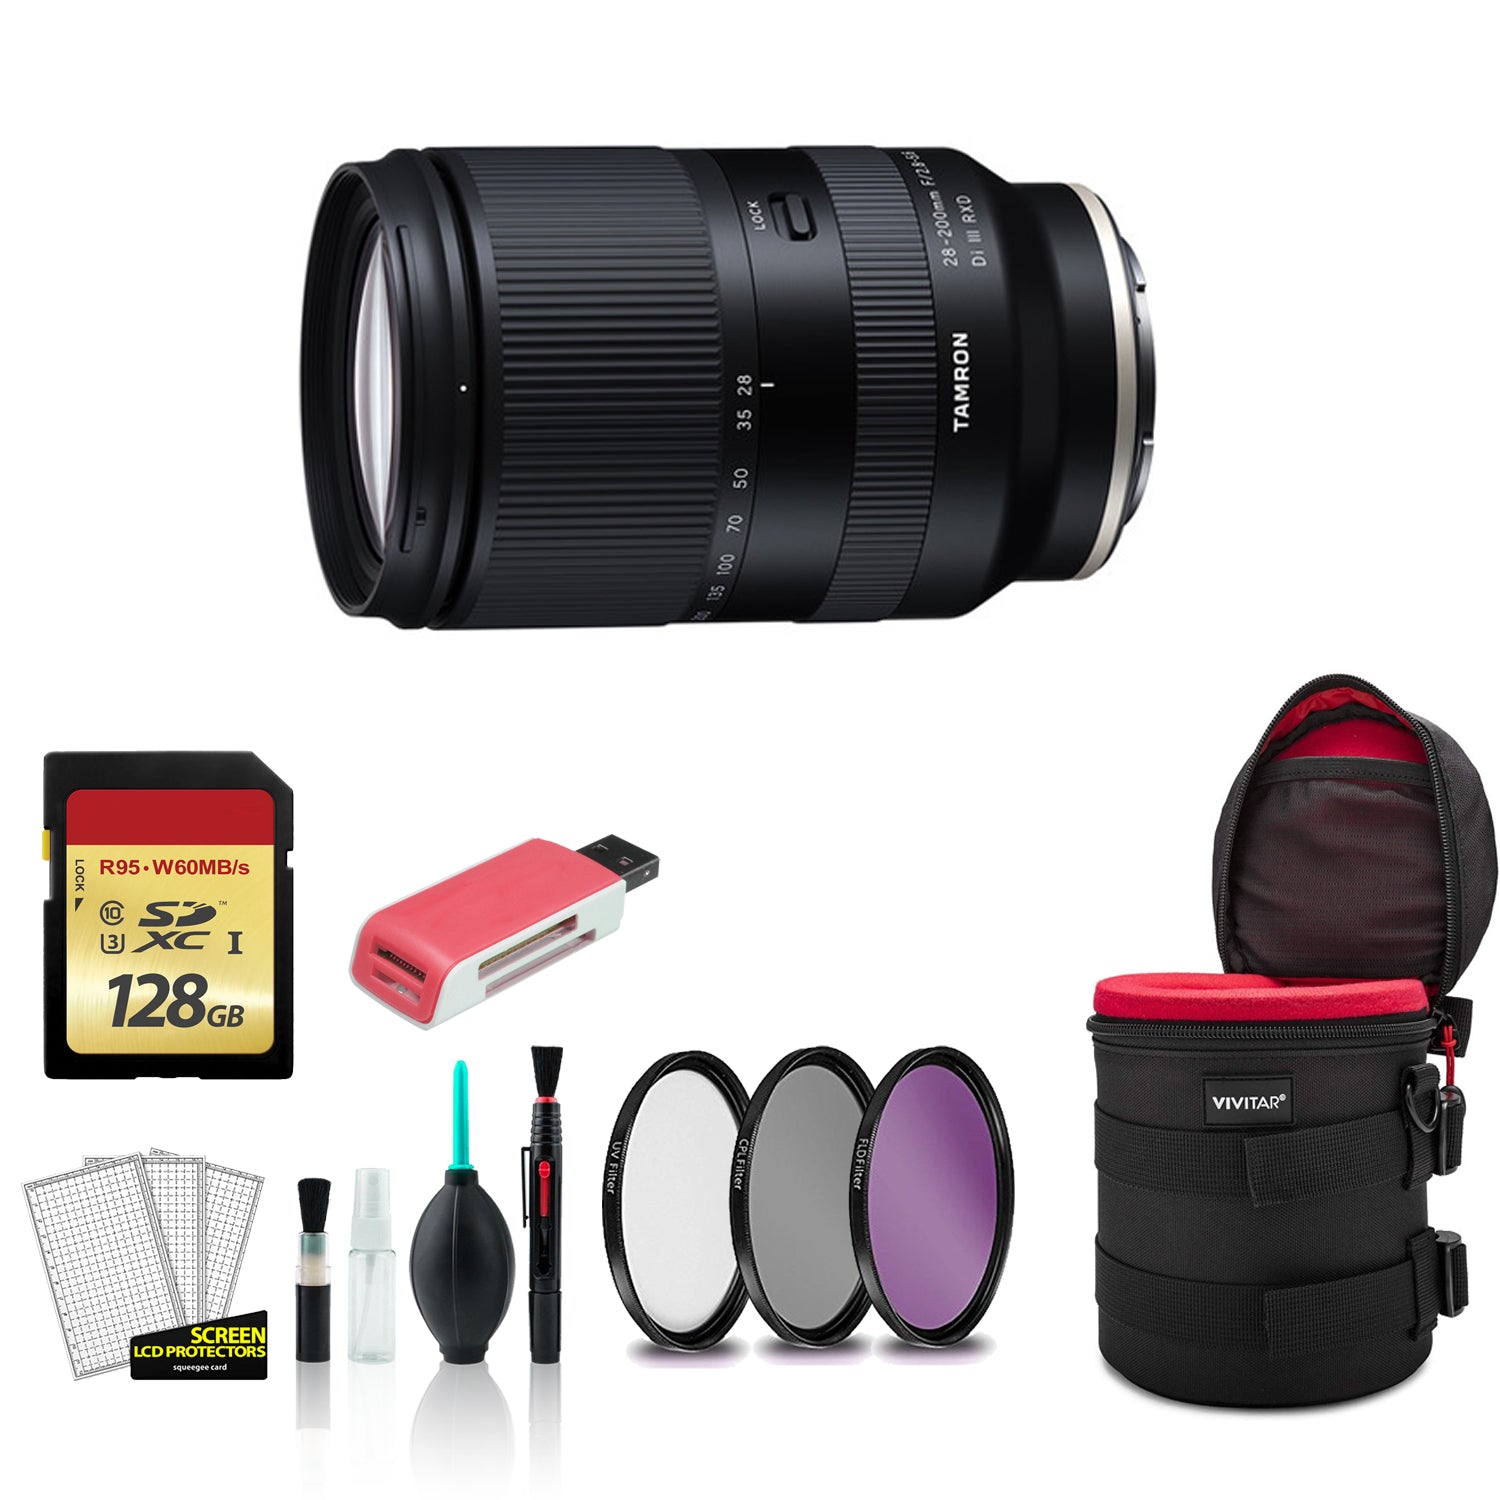 Tamron 28-200mm for Sony E f/2.8-5.6 Di III RXD Lens with 128GB Memory Card + Padded Case (International Model) Bundle